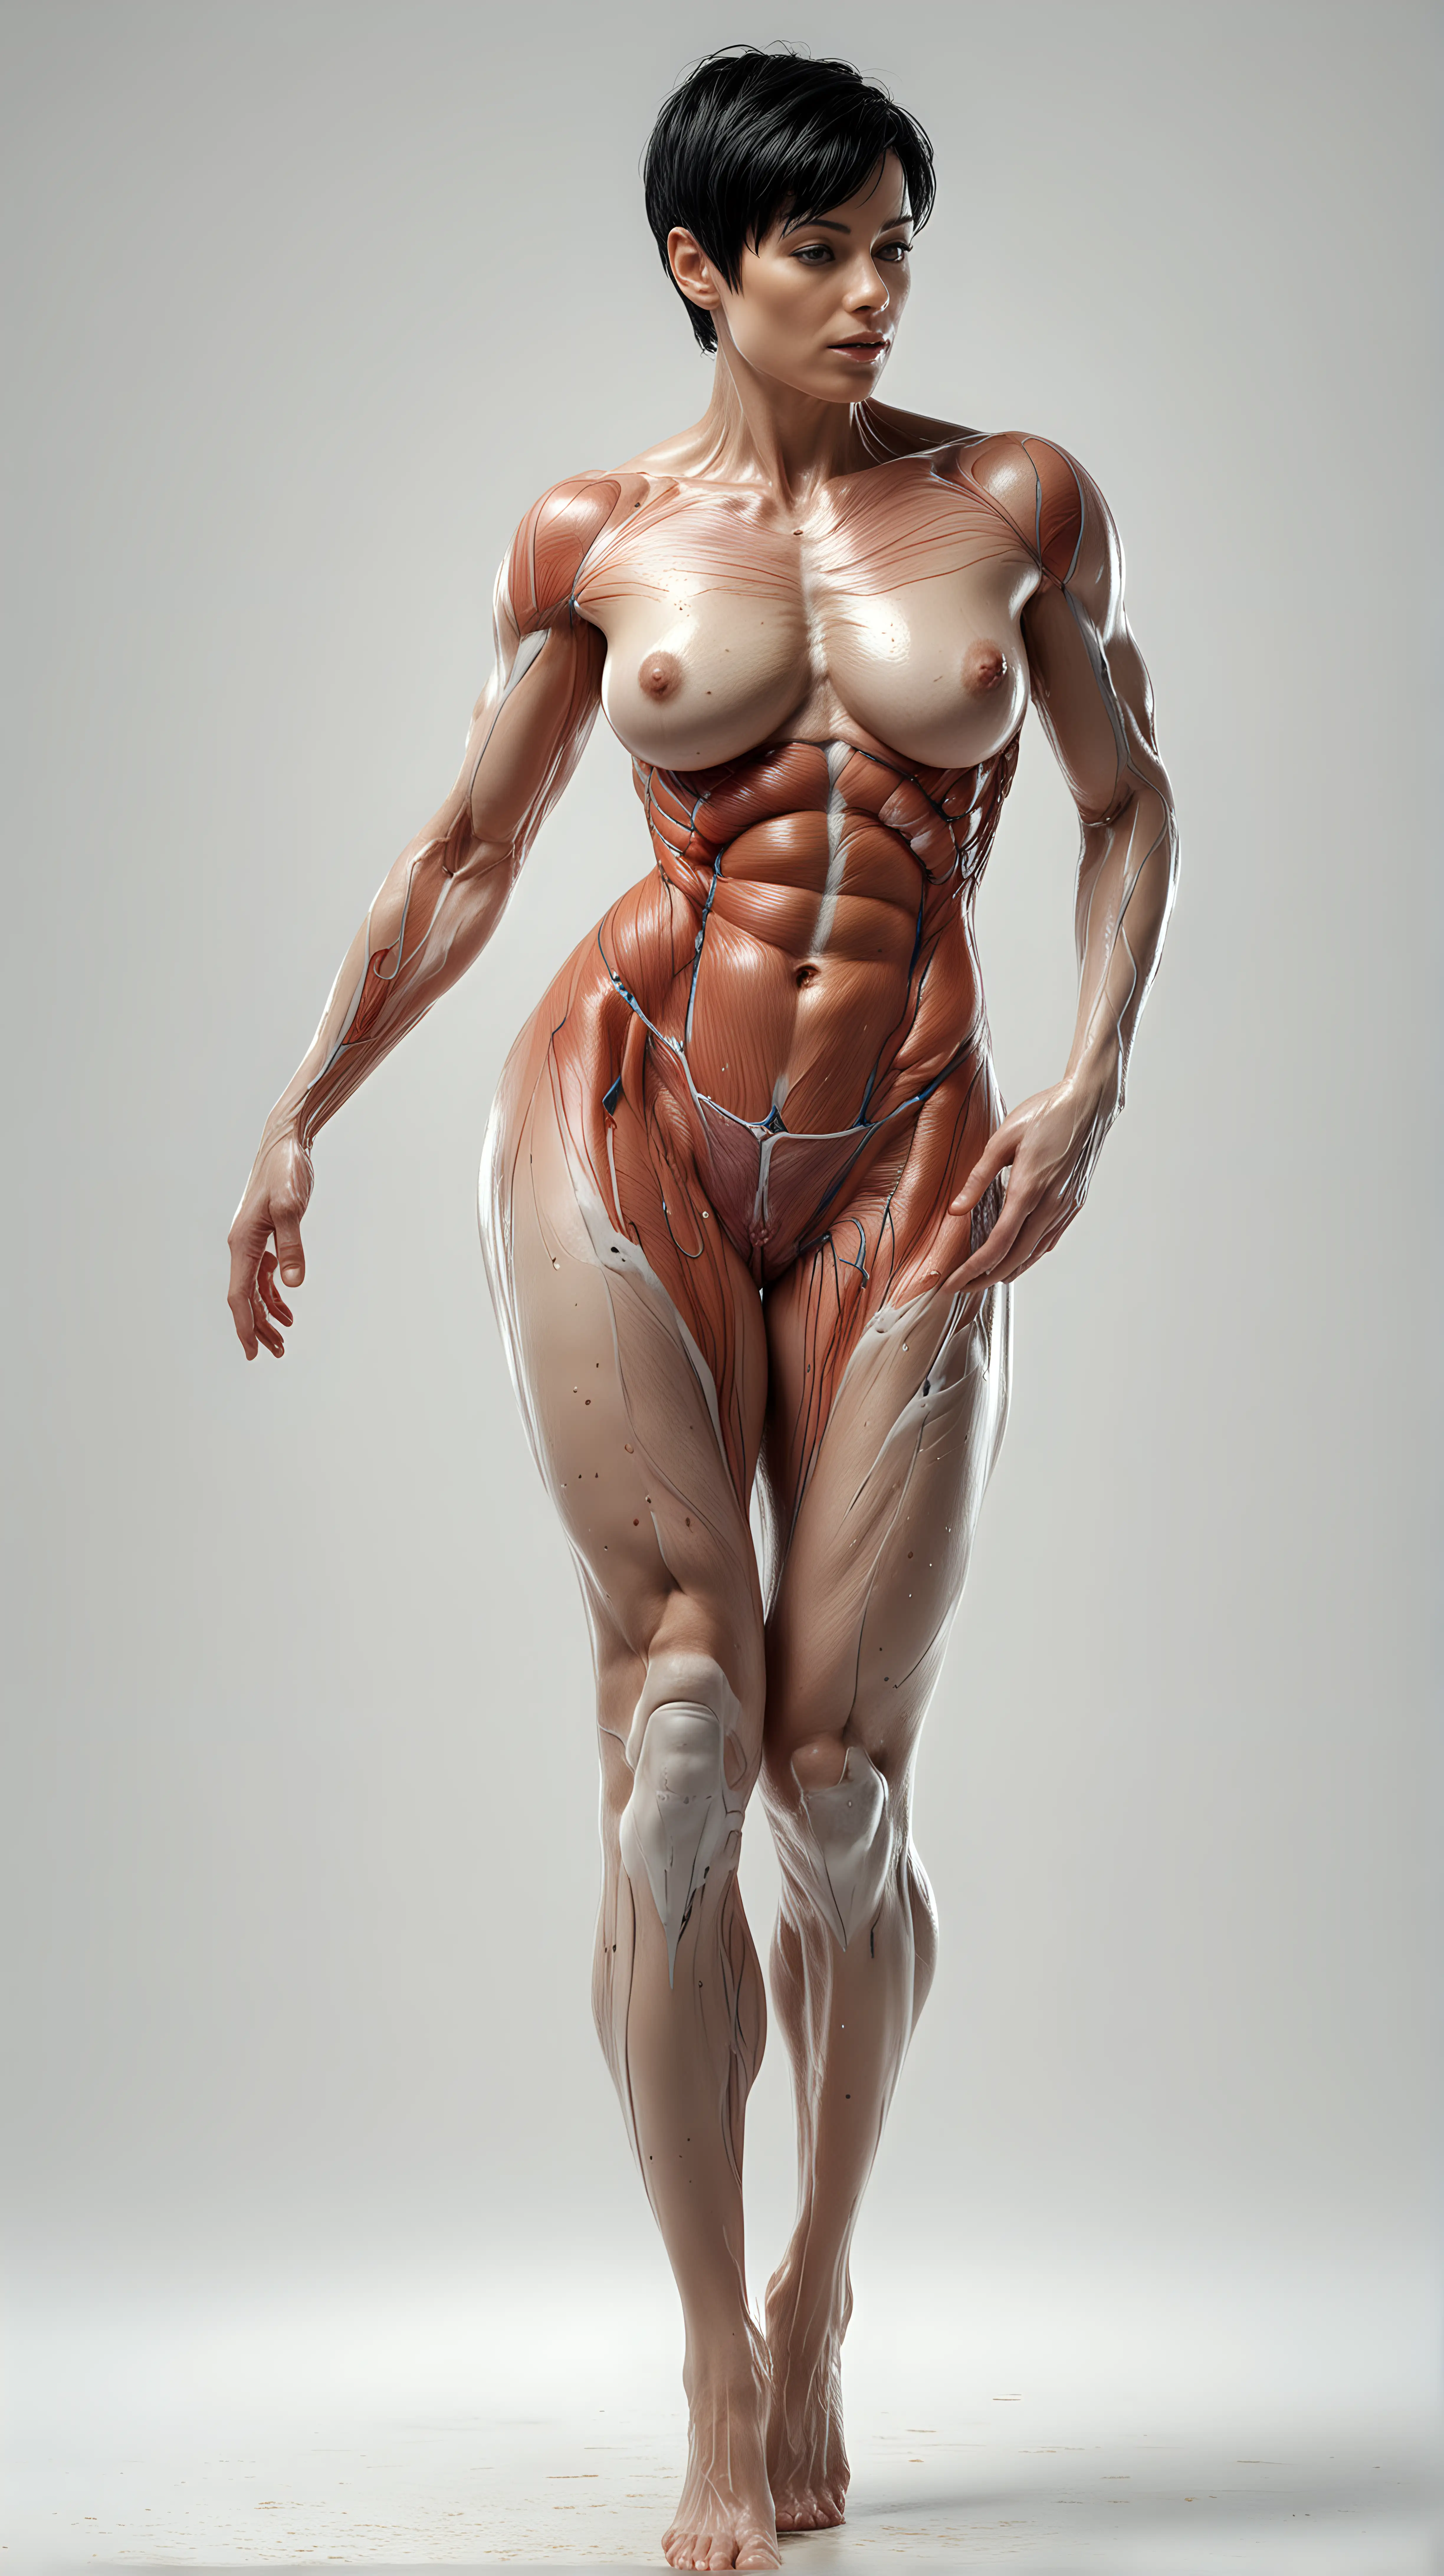 Female Muscle and Circulatory System Anatomy Athletic Figure in Wet Look Running